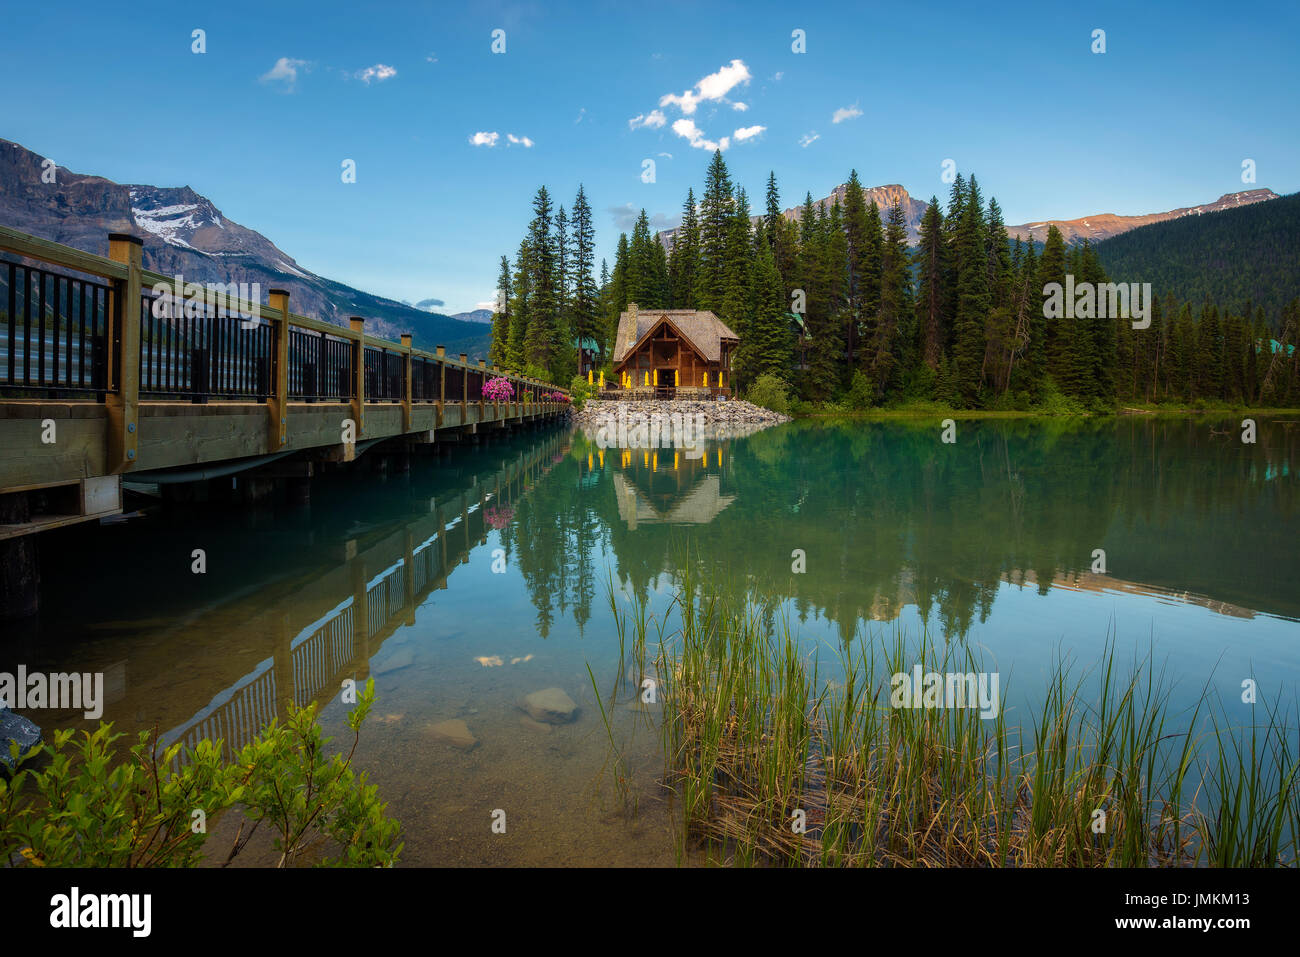 Emerald Lake Lodge with a restaurant in Yoho National Park, British Columbia, Canada Stock Photo